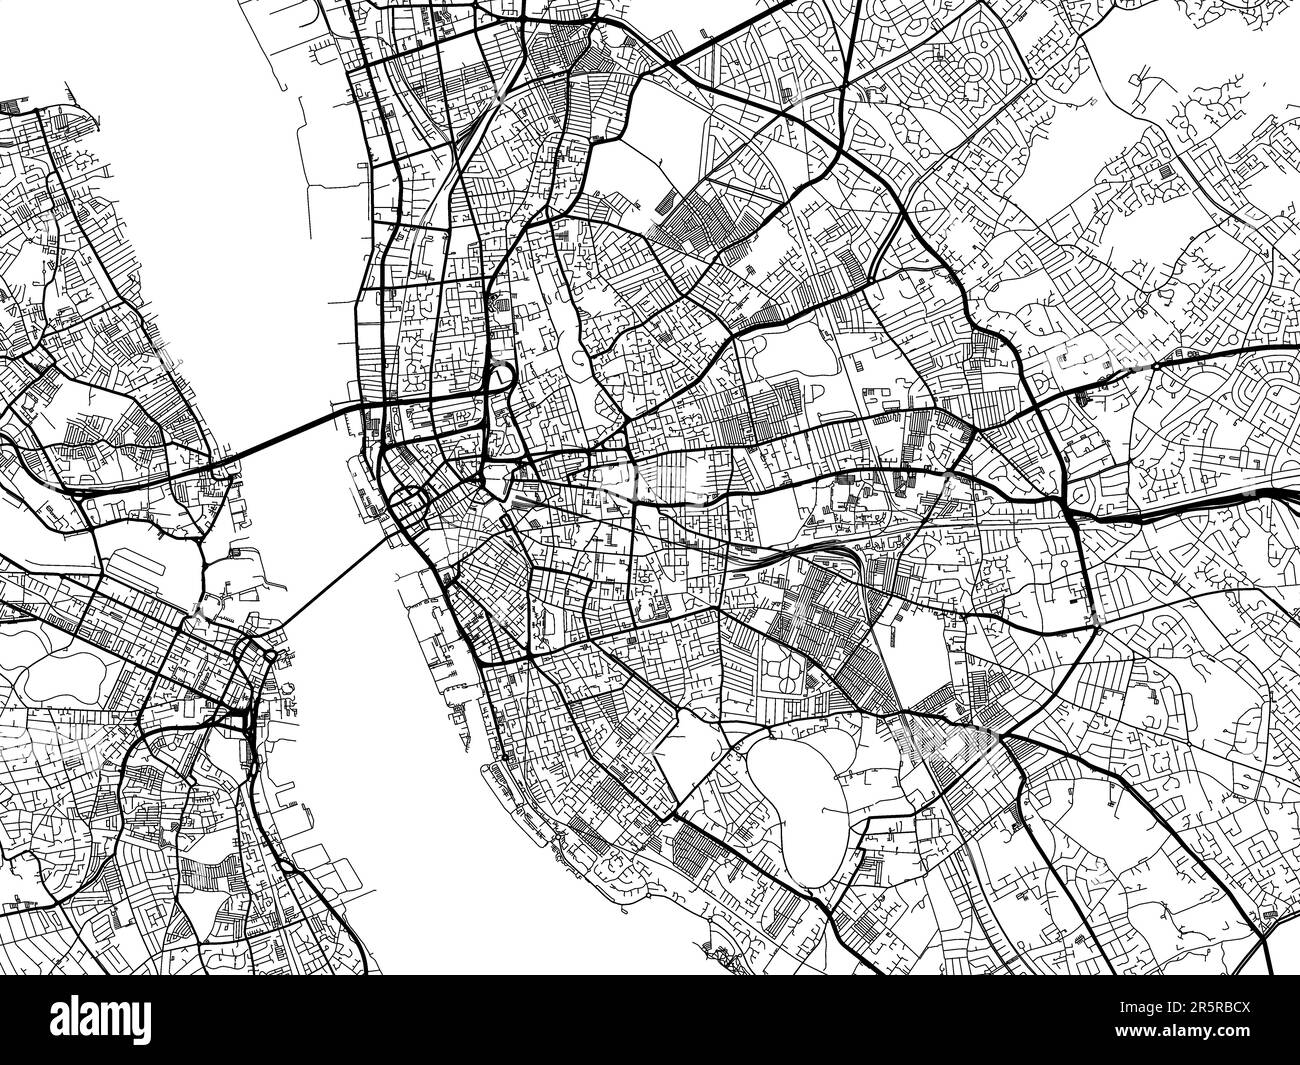 Road map of the city of  Liverpool in the United Kingdom on a white background. Stock Photo